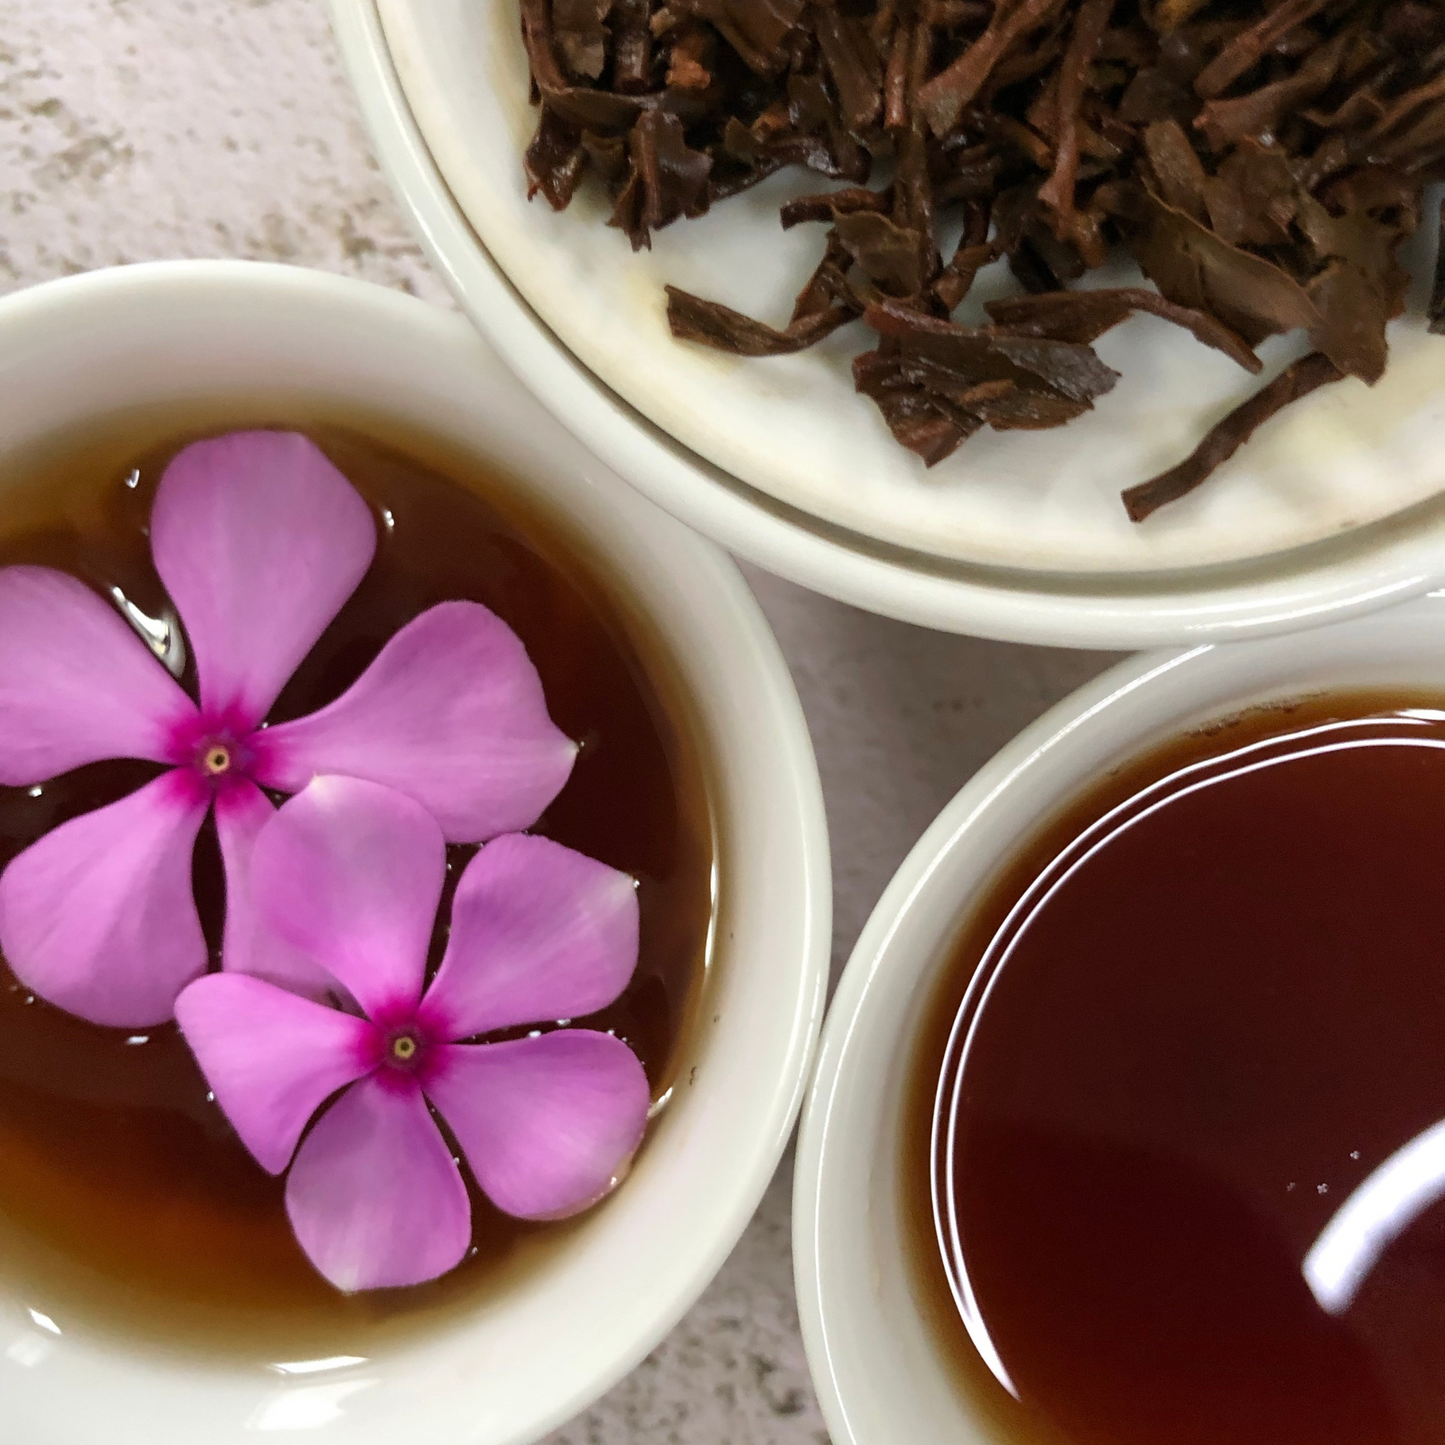 Buy Online : Second Flush Loose Tea Leaves - ChaiExperience